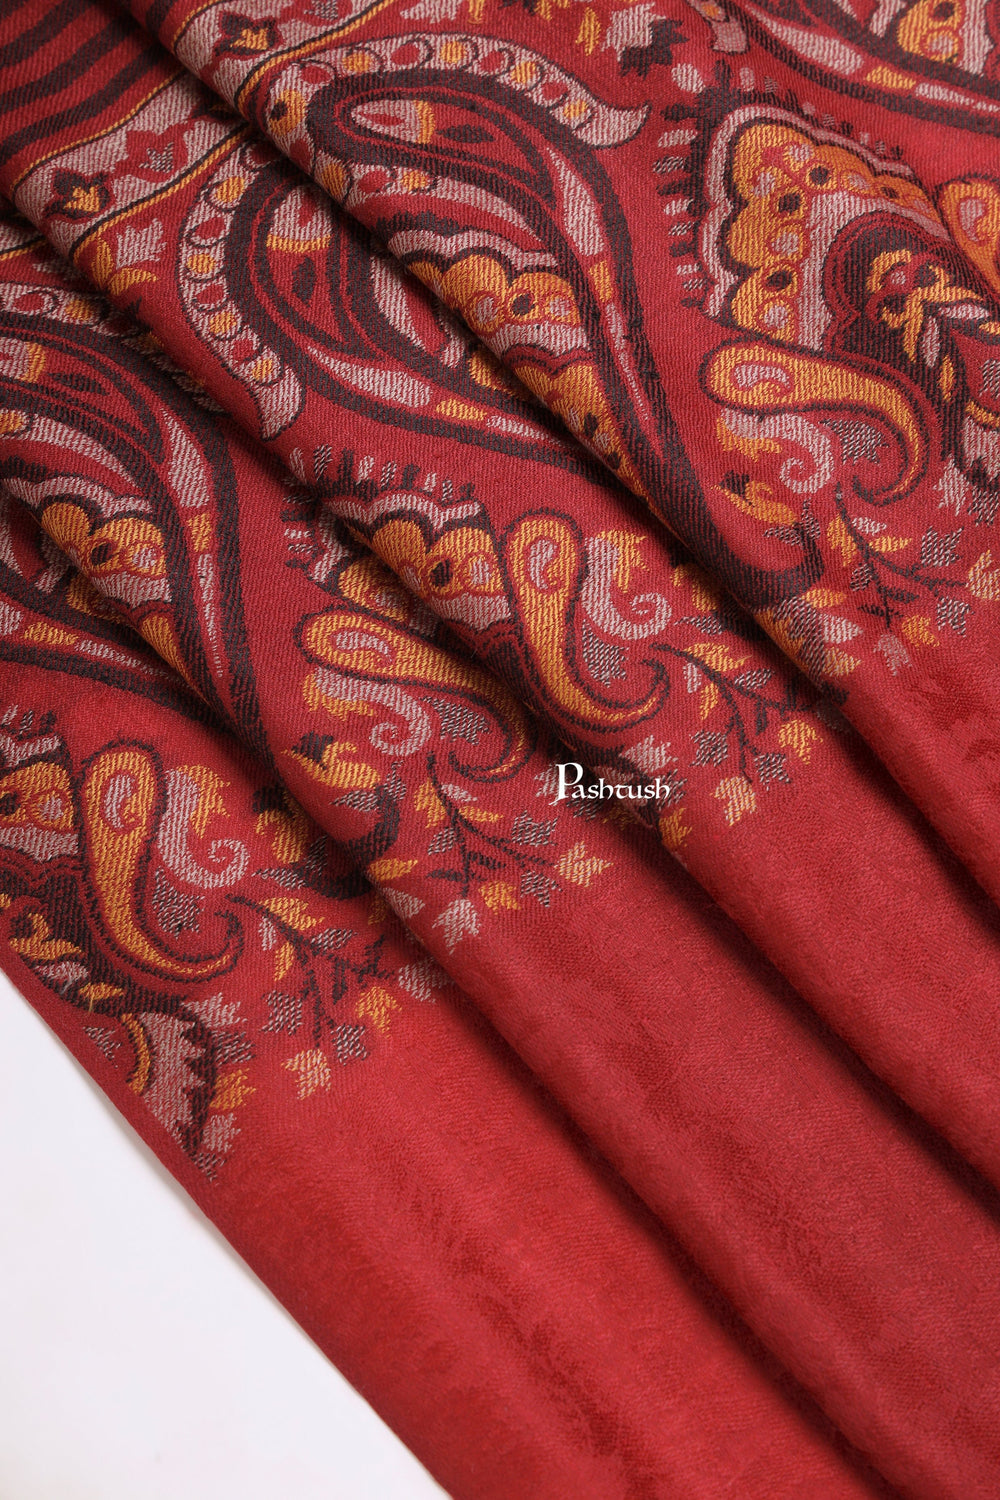 Pashtush India Mens Scarves Stoles and Mufflers Pashtush Mens Extra Fine Wool Stole, Pasiley Weave Design, Maroon